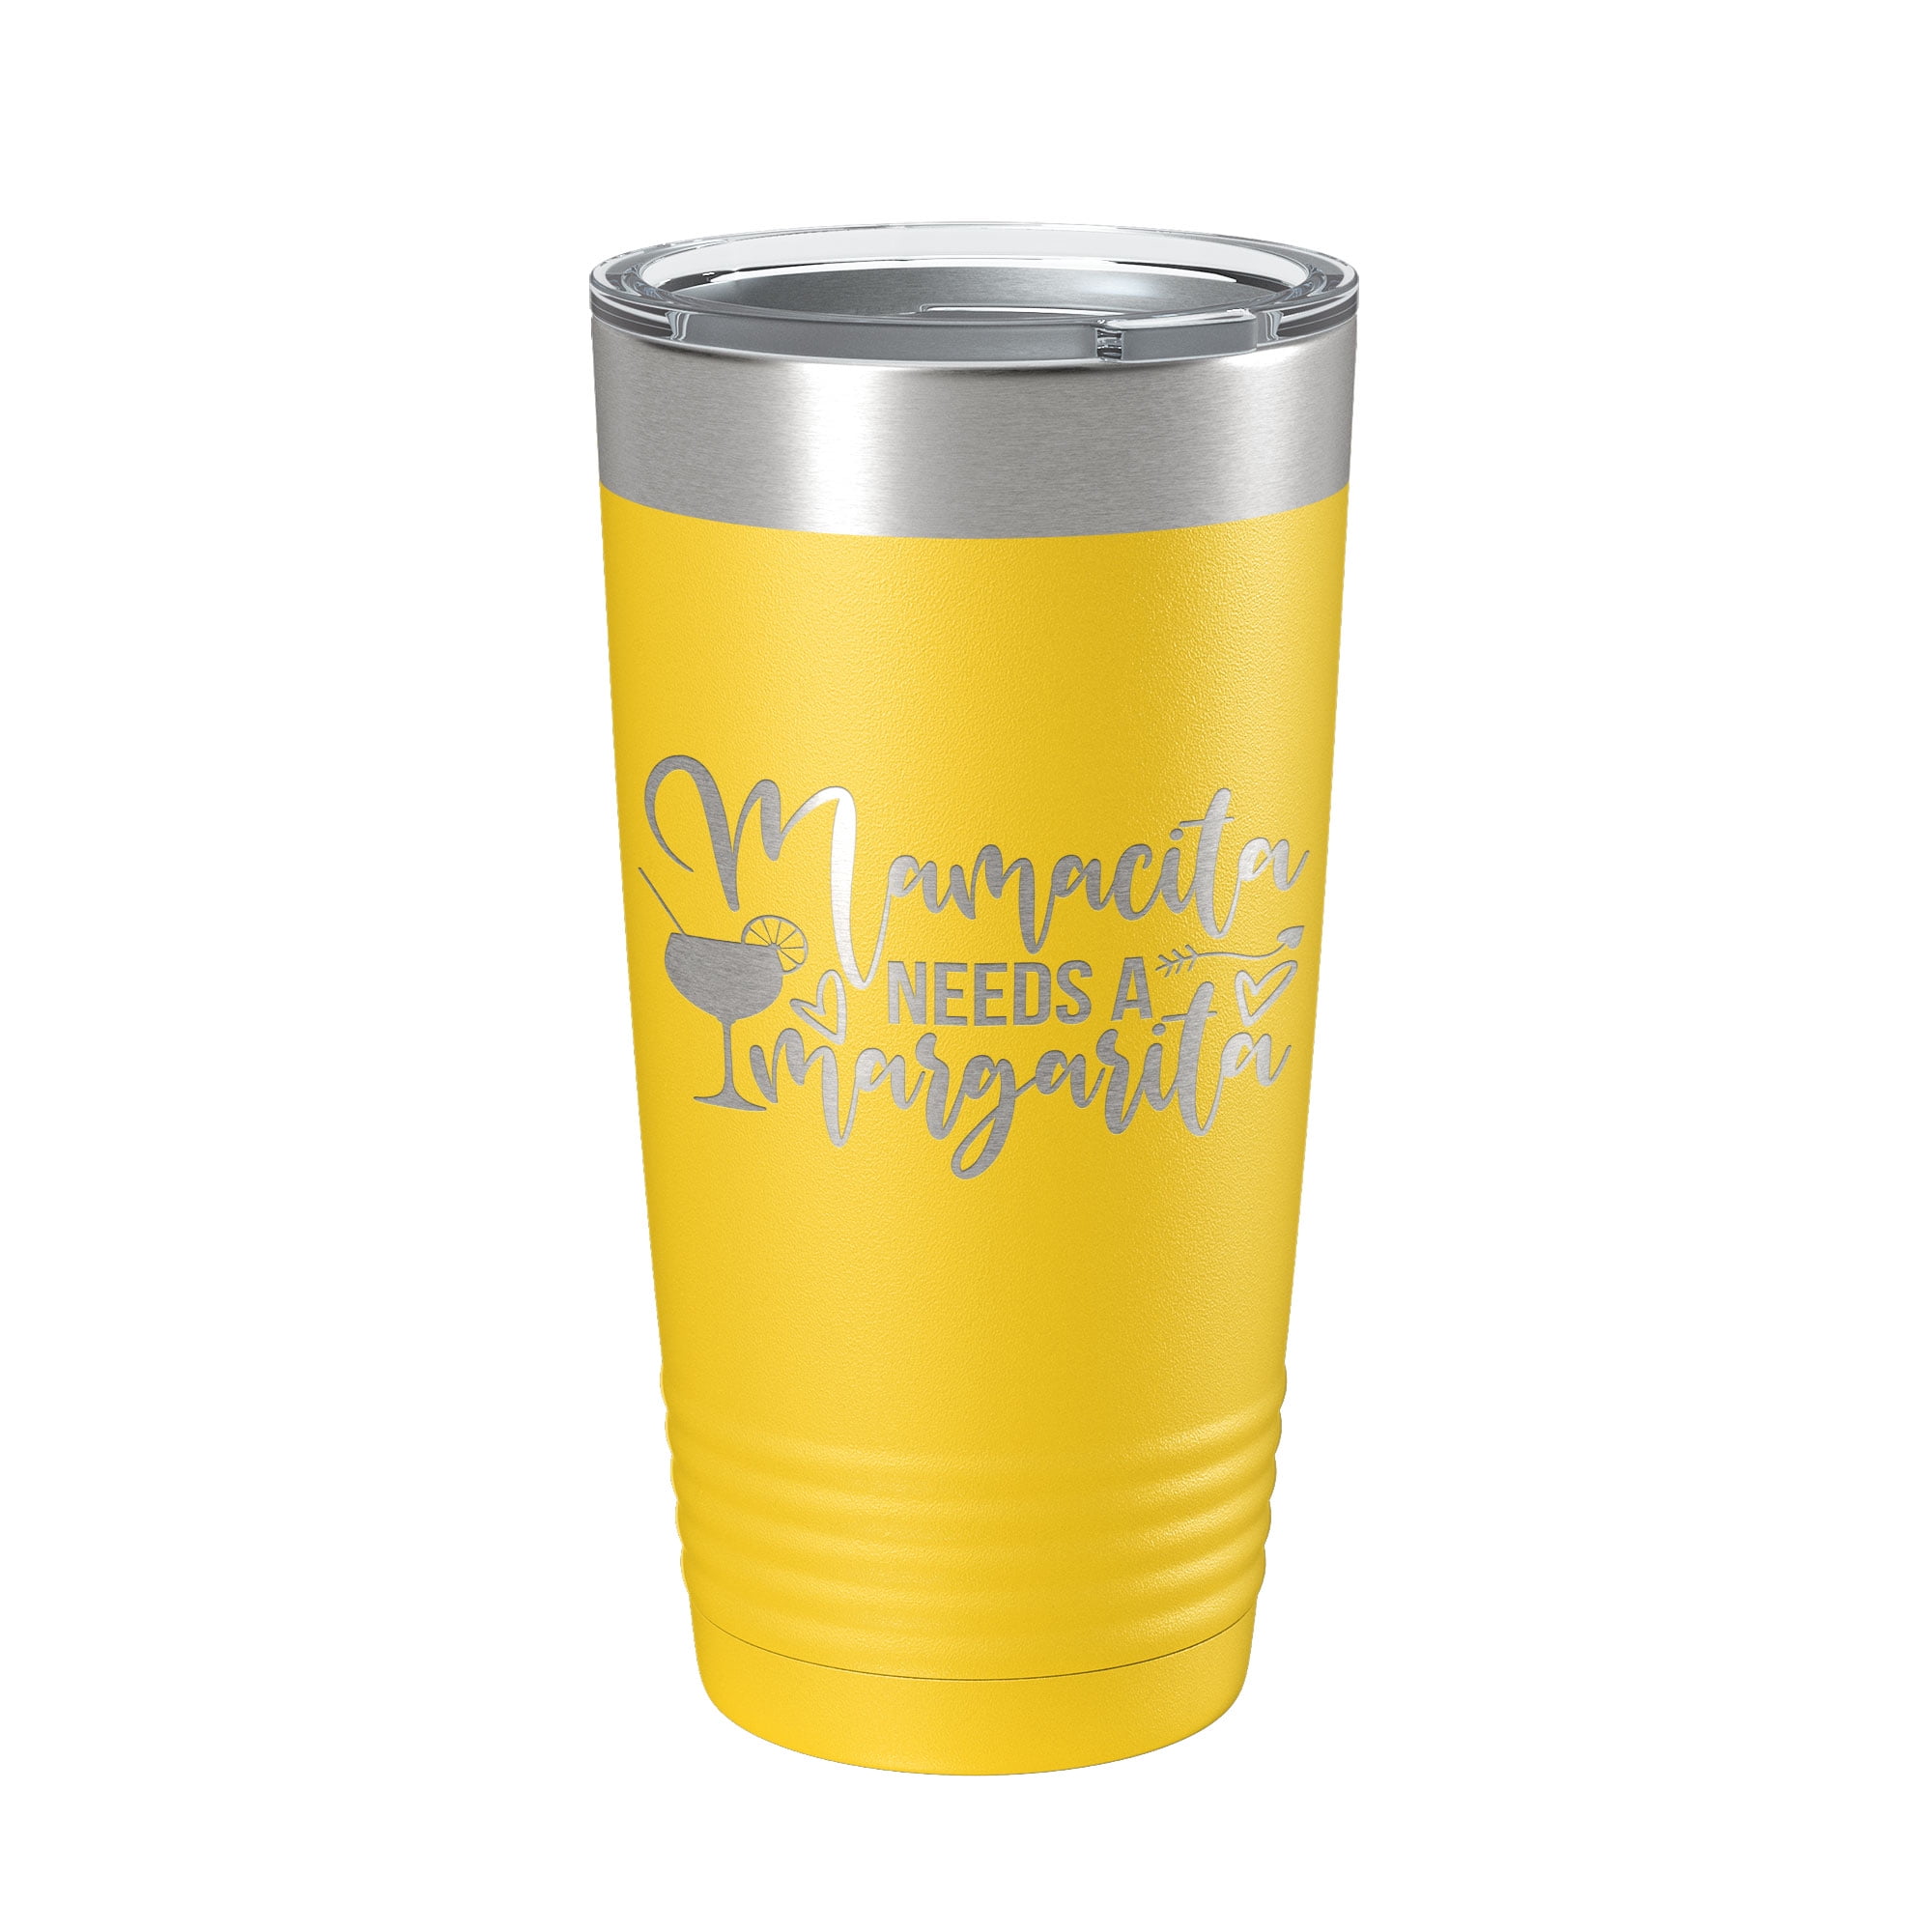 Personalised Stainless Steel Travel Cup, Insulated Drinks Flask, Laser  Engraved Travel Mug, Reusable Coffee, Tea Cup, Bridesmaid Gift 